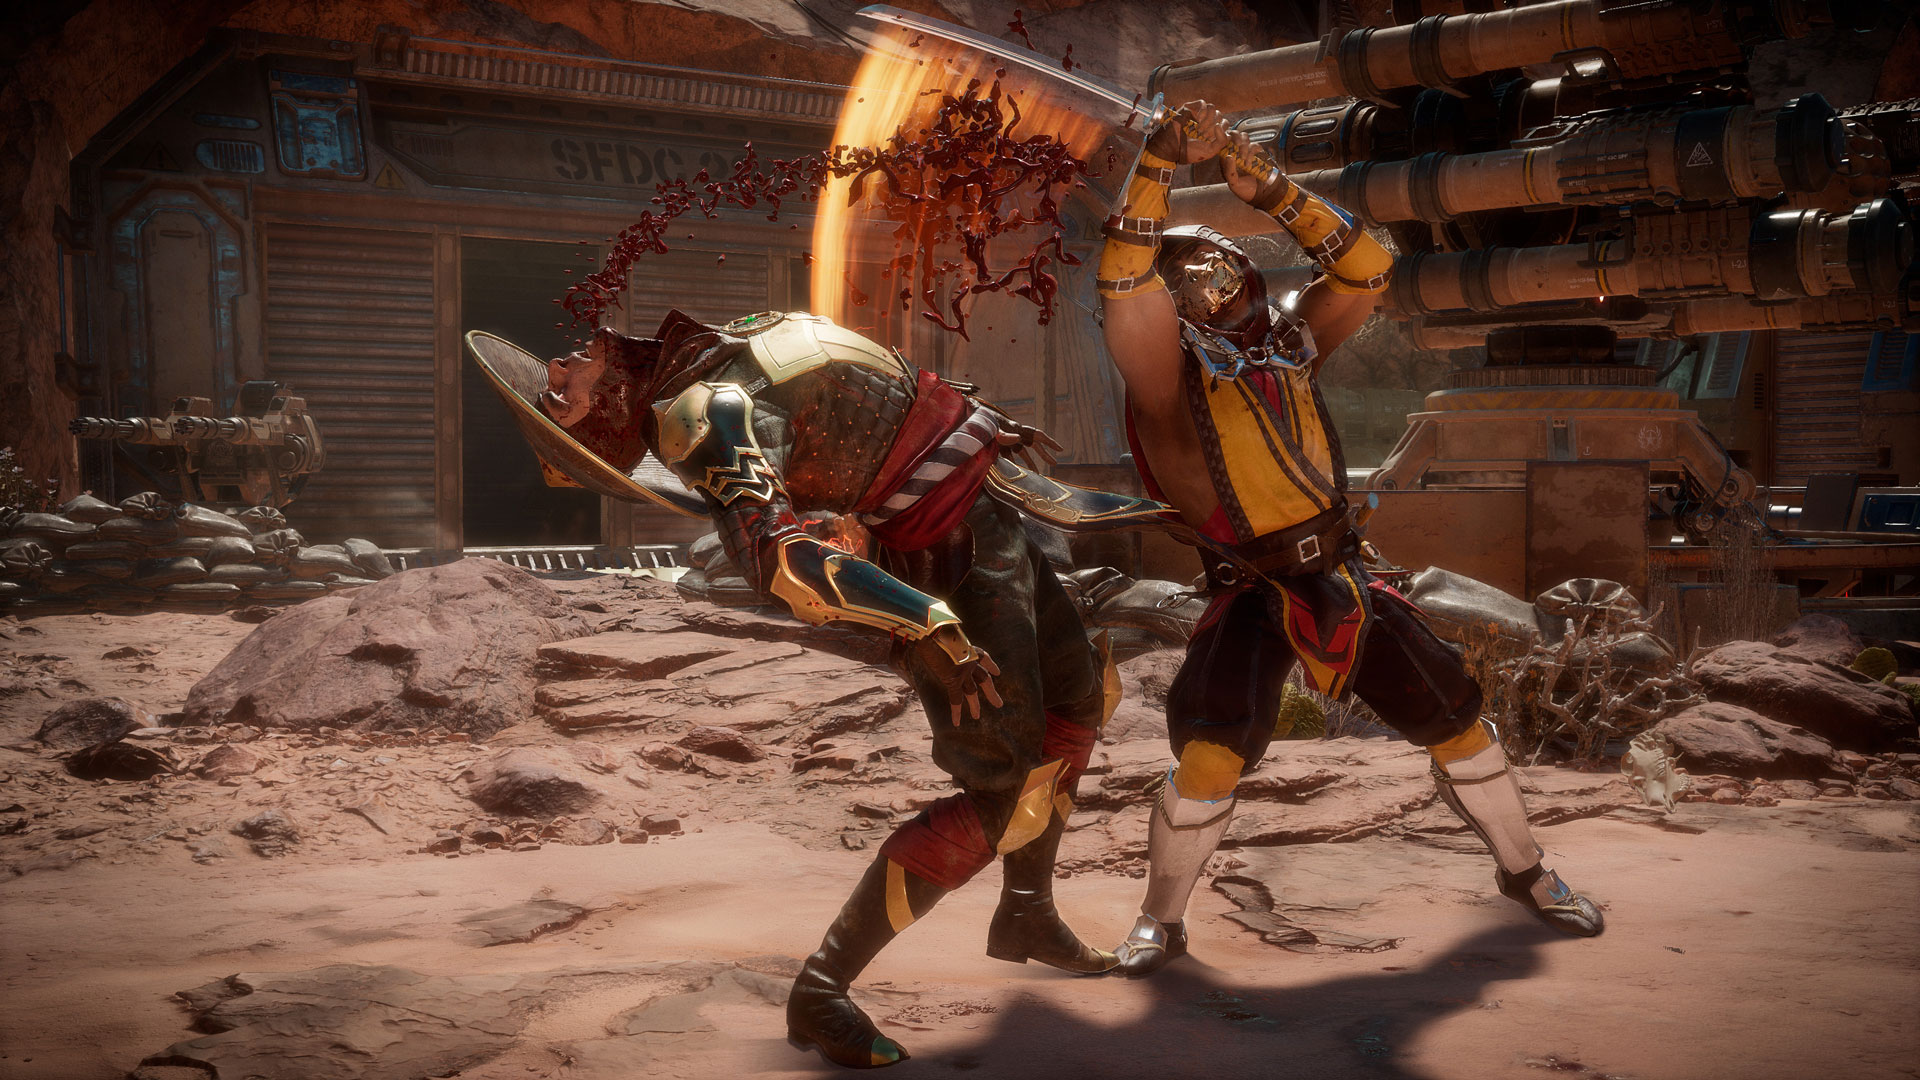 How to Perform the New Fatalities and Brutalities in 'Mortal Kombat 11'  Aftermath